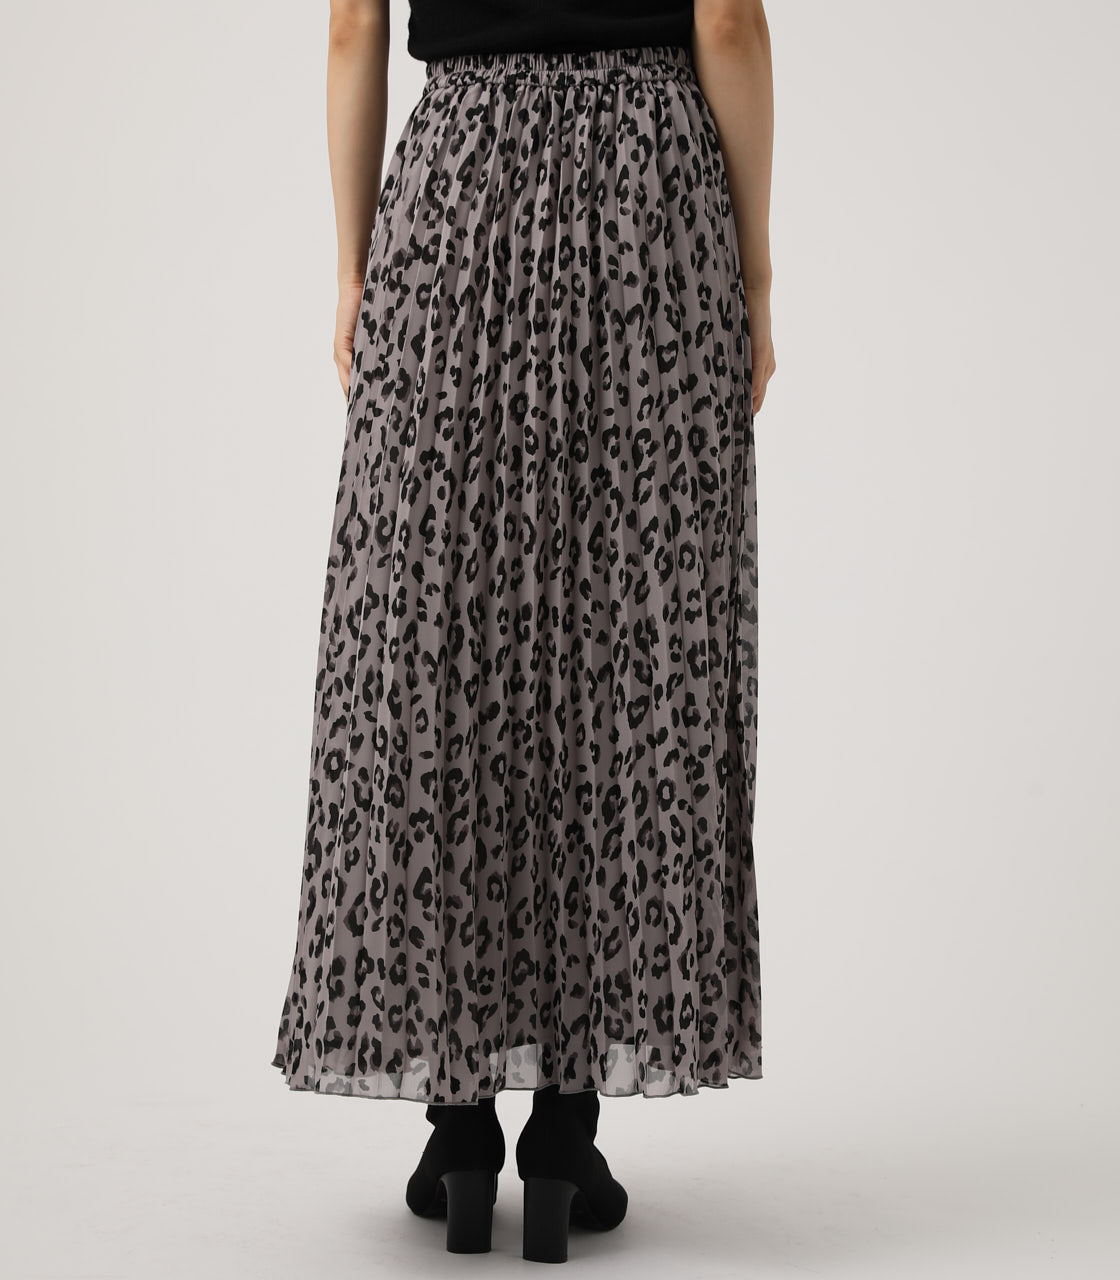 Leopard Pleats Flared Skirt レオパードプリーツフレアスカート Azul By Moussy アズールバイマウジー 公式通販サイト